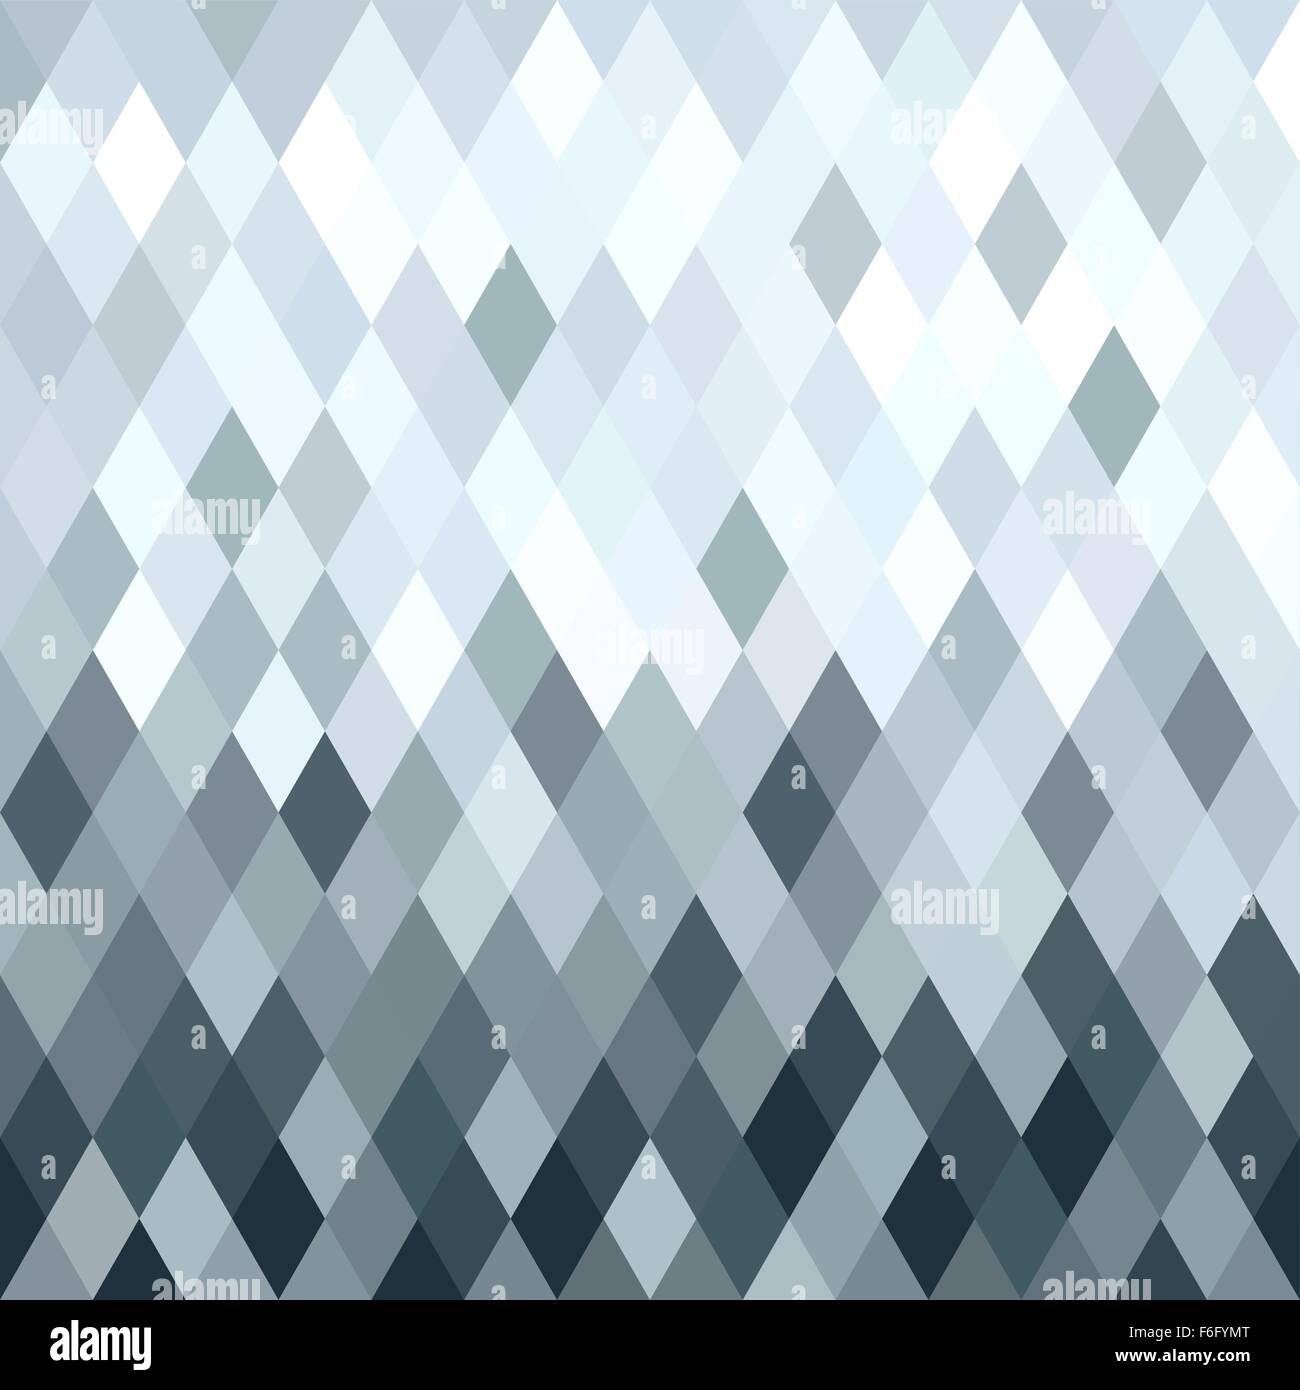 Fancy silver metallic rhombus background in low poly style. Ideal for web, print or greeting card. EPS10 Stock Vector